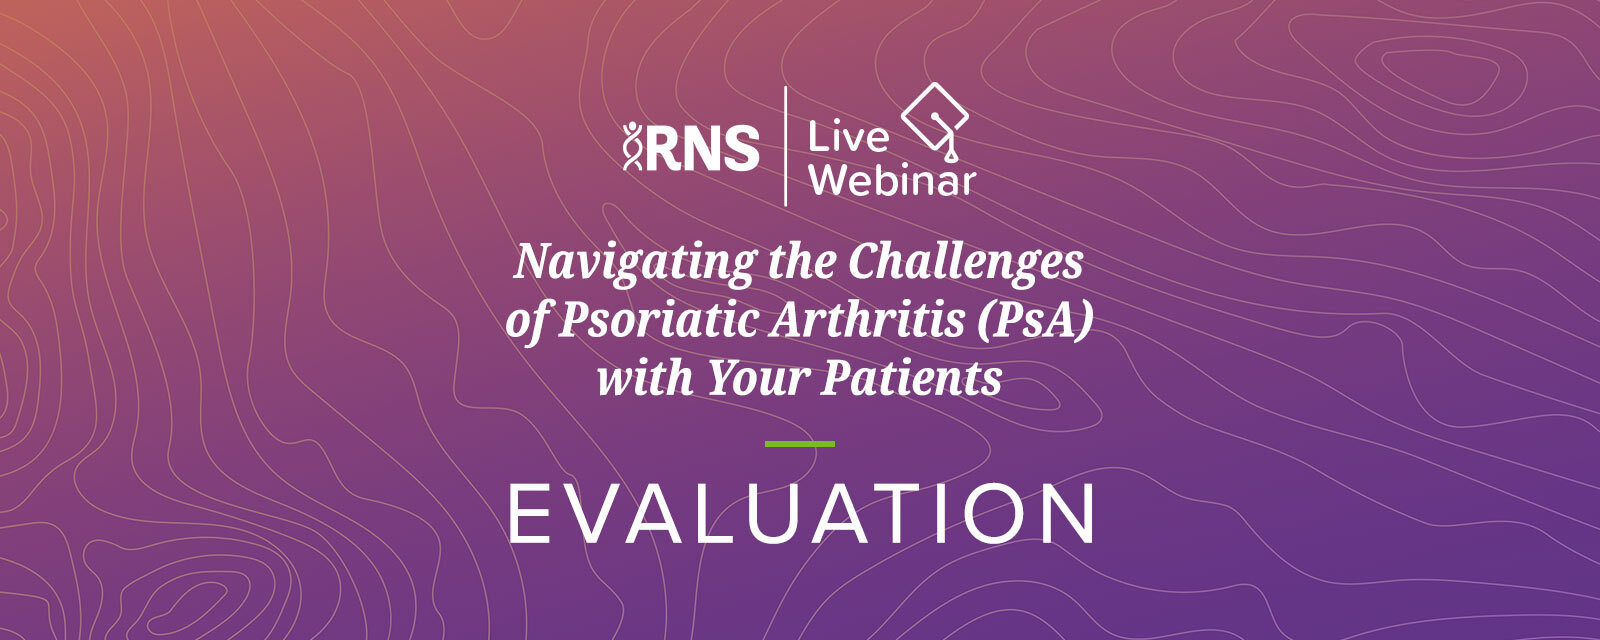 Live Evaluation: 2020 RNS Live Webinar: Navigating the Challenges of Psoriatic Arthritis with Your Patients